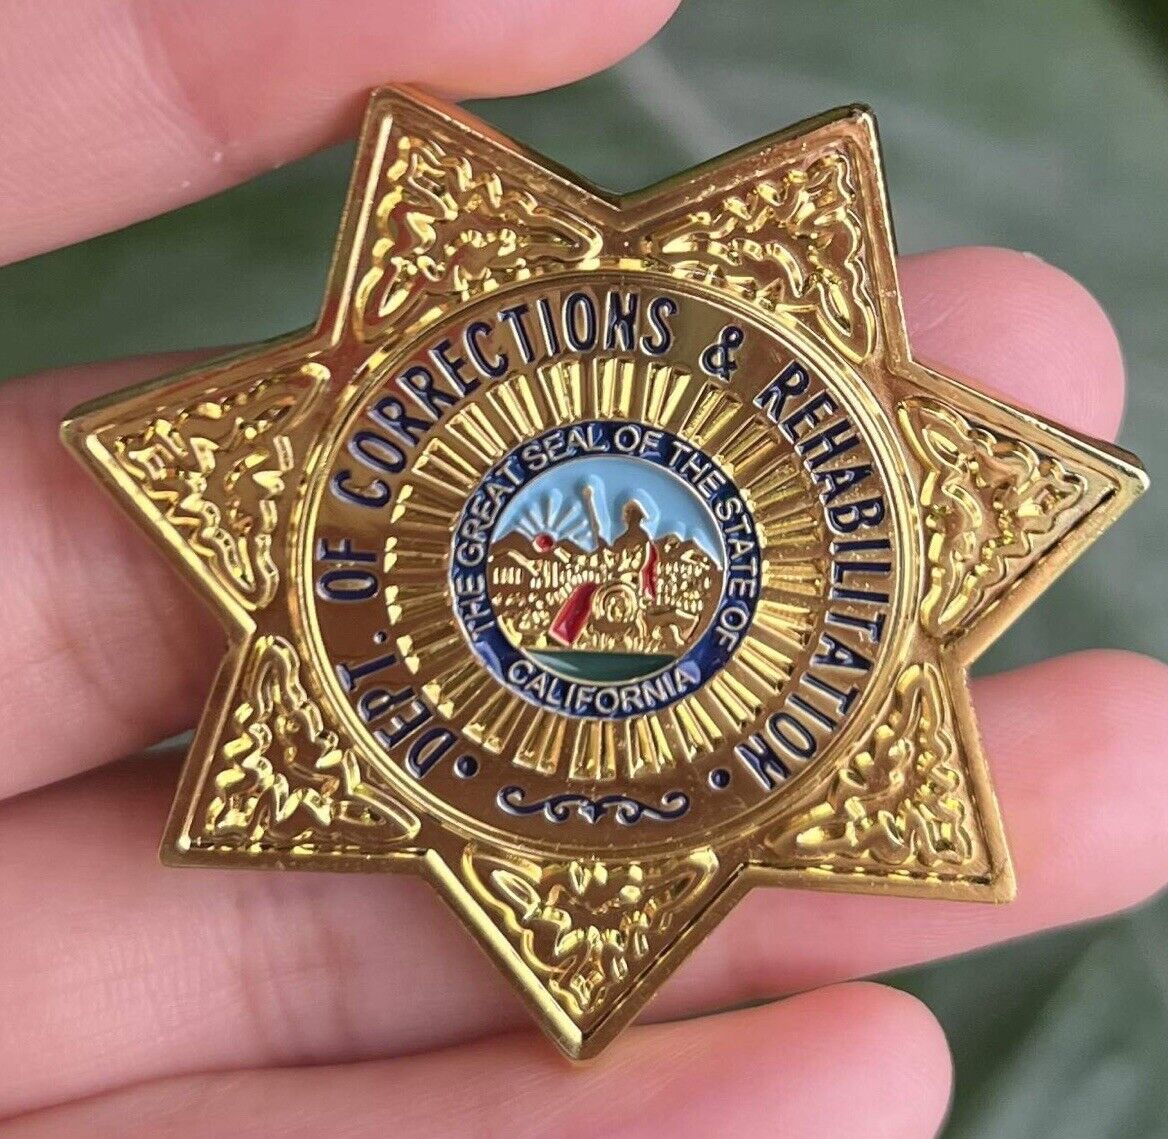 California Department of Corrections Challenge Coin (CDCR)